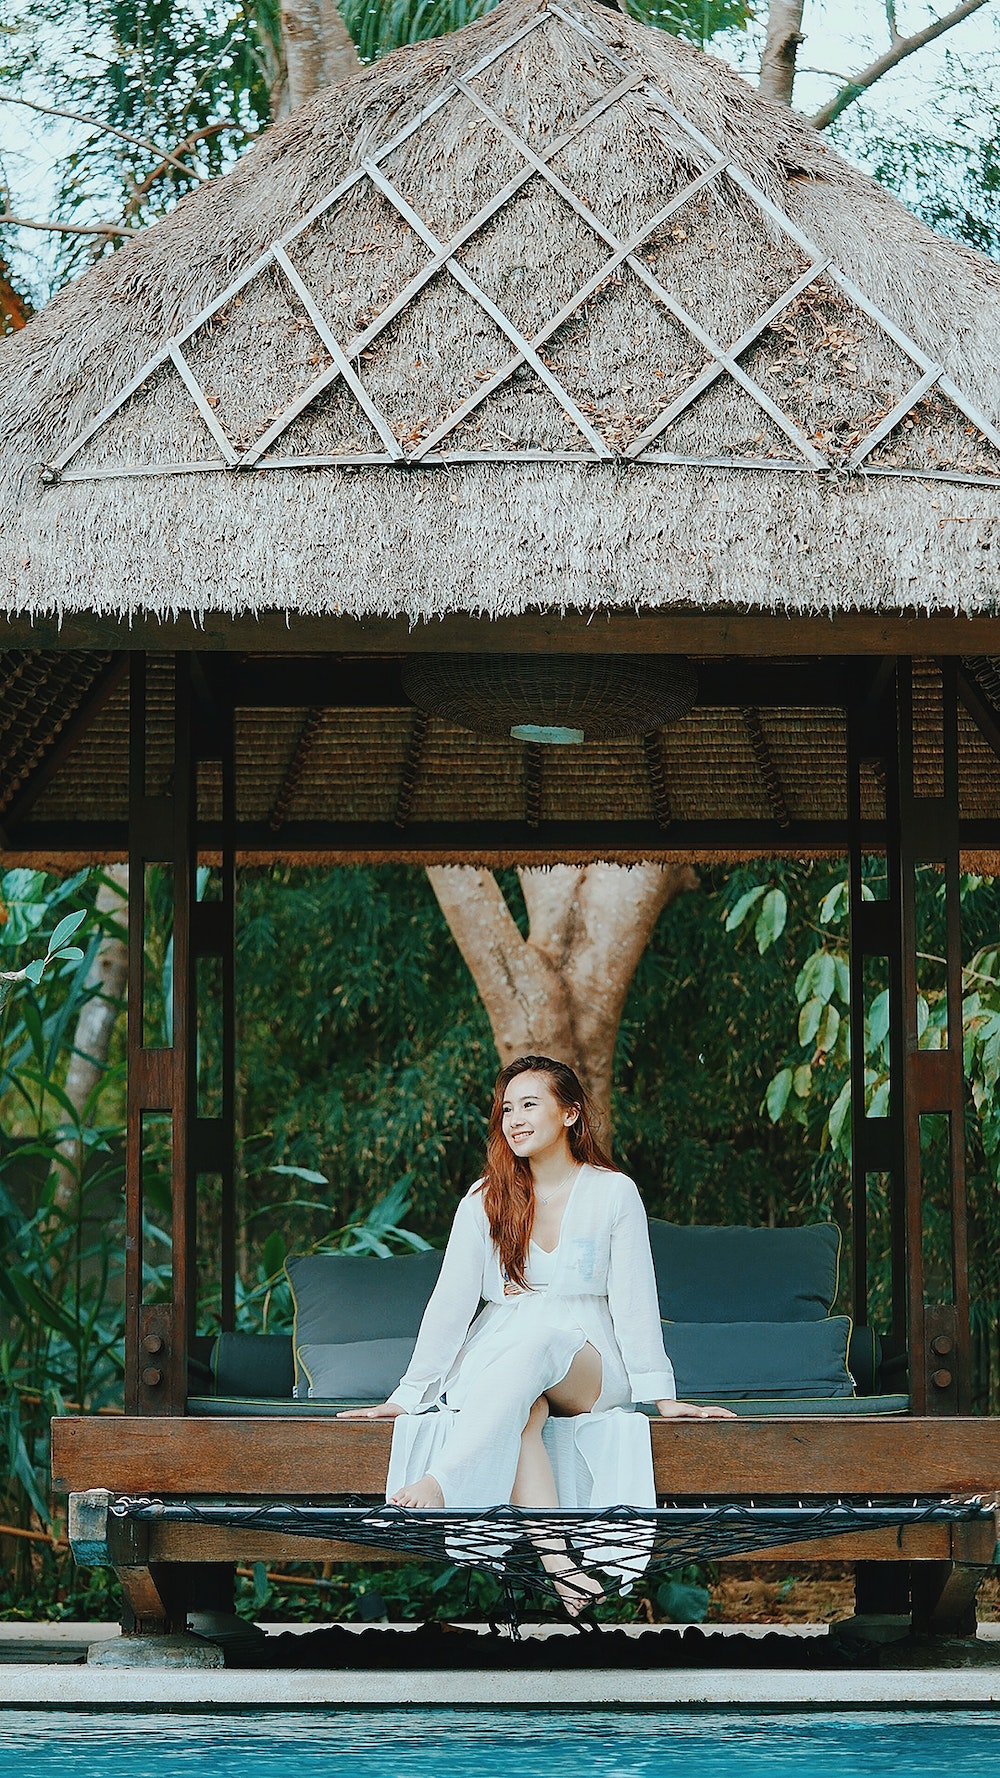 Salt-Water Sandals Blog Asia's Coziest Chill Spots pampering day spa